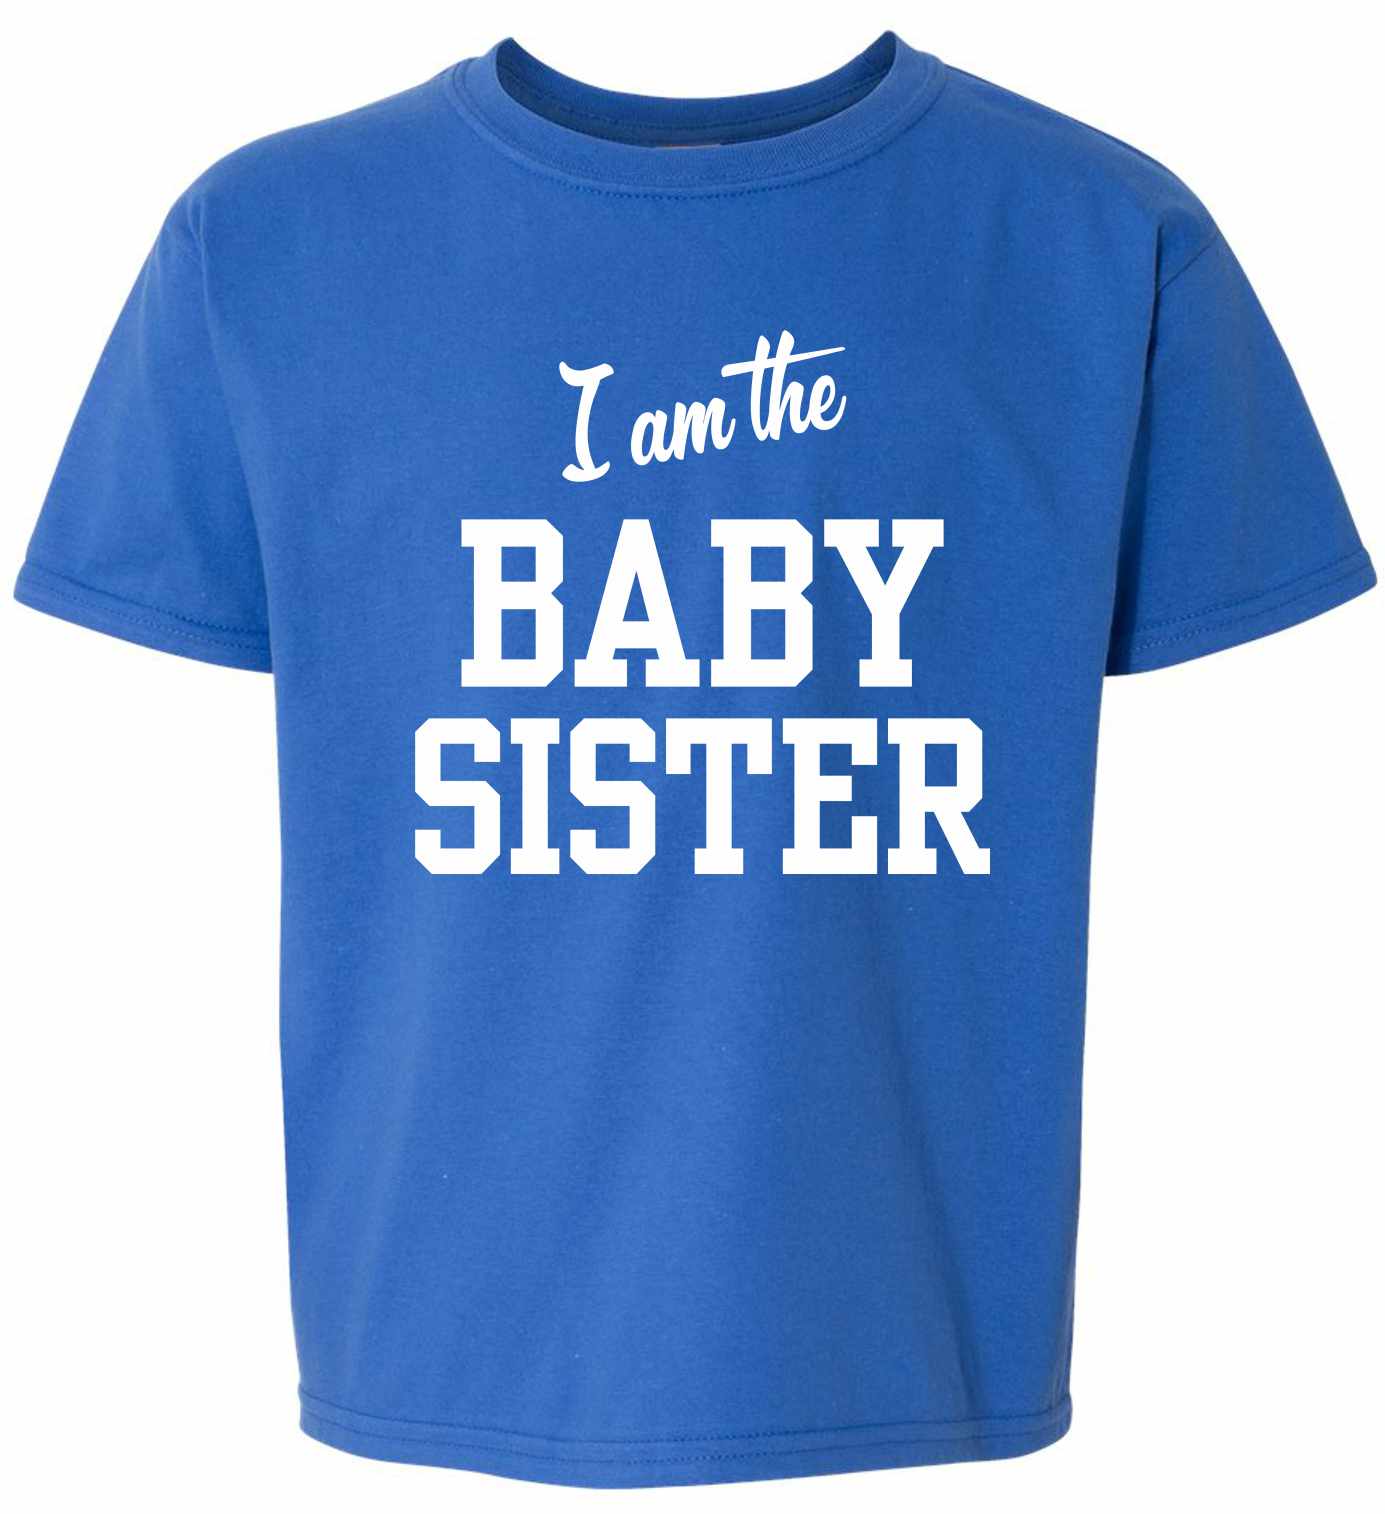 I am the Baby Sister on Kids T-Shirt (#1292-201)